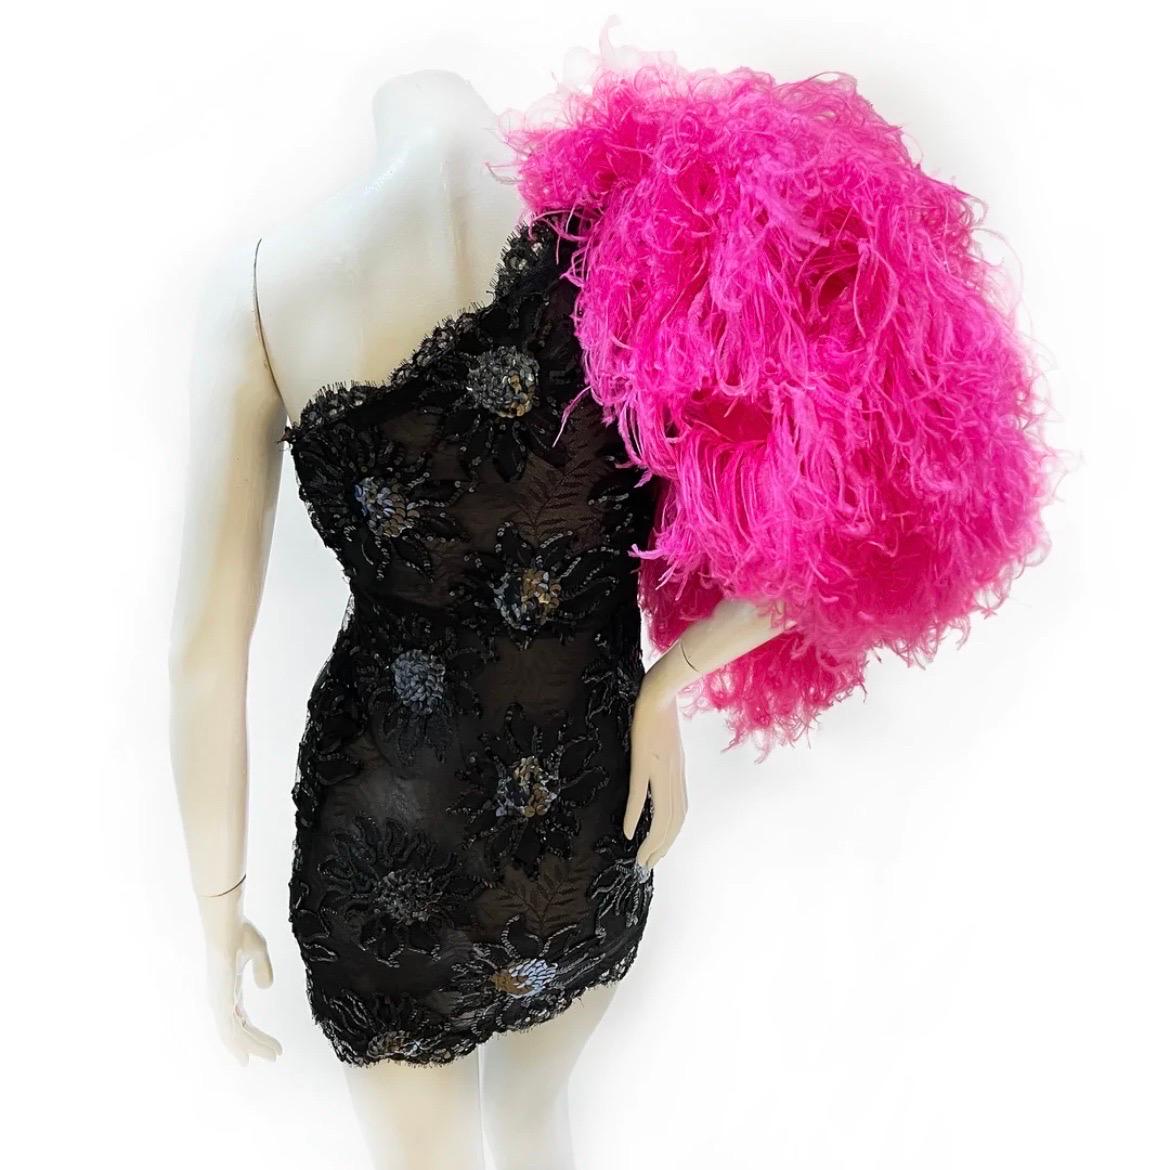 Sequin Feather One Sleeve Dress by Yves Saint Laurent 
Spring/Summer RTW 1991
Single puff sleeve consisting of hot pink feathers
Black semi-sheer lace 
Black/silver embroidered sequin floral patter throughout 
Side zip closure
Mini dress, body